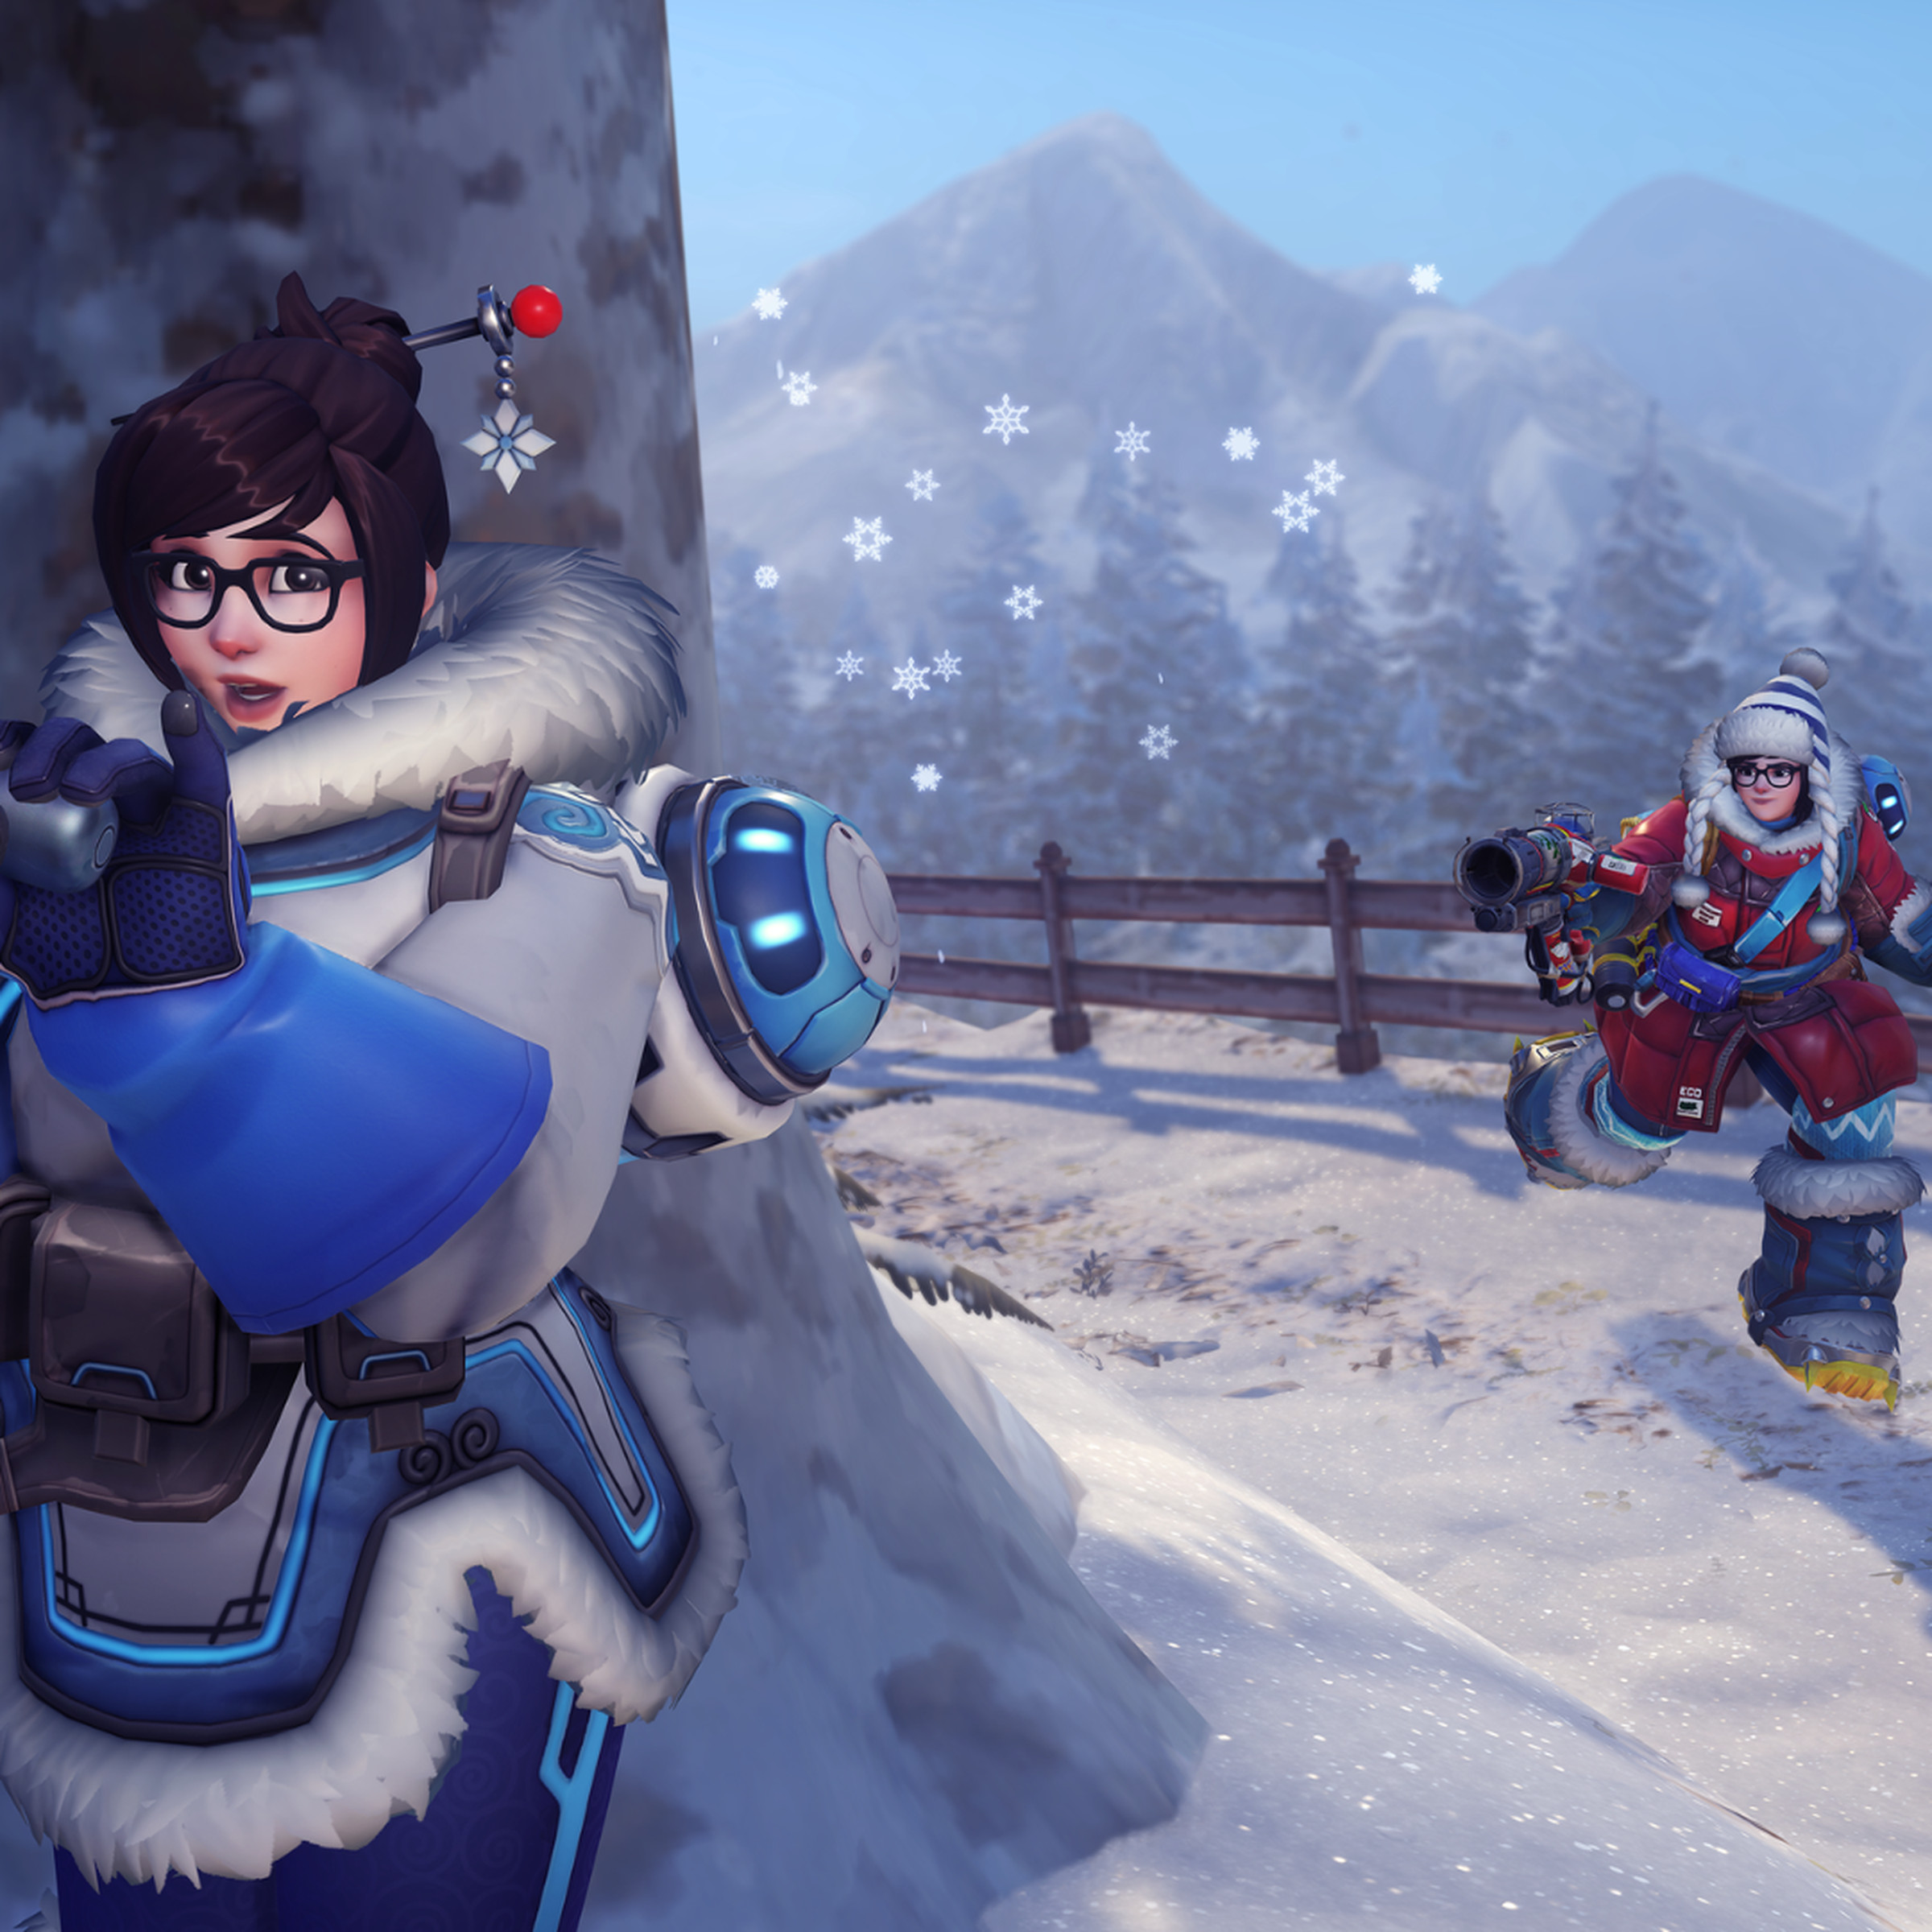 Screenshot from Mei’s Snowball Challenge featuring one Mei sneaking up behind another Mei to attack.